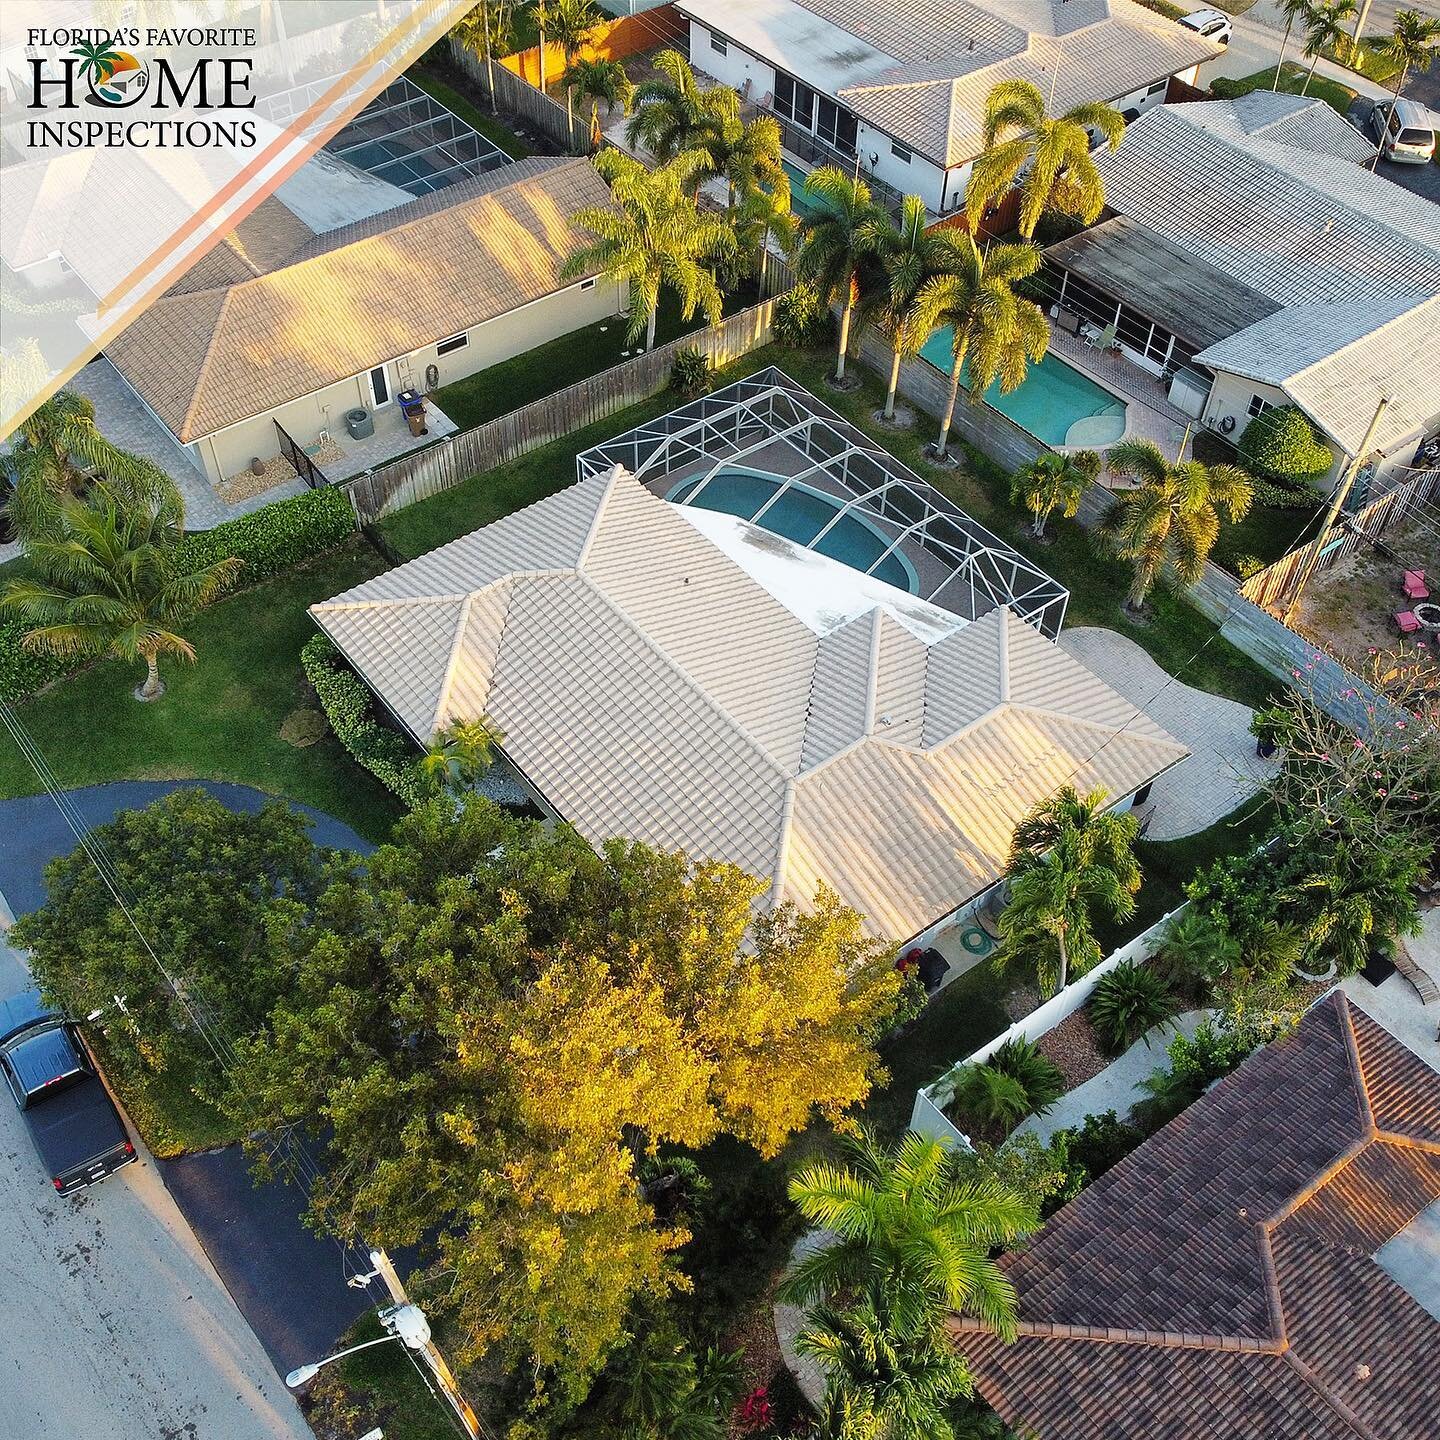 Recently inspected home and pool in Deerfield Beach, Florida!